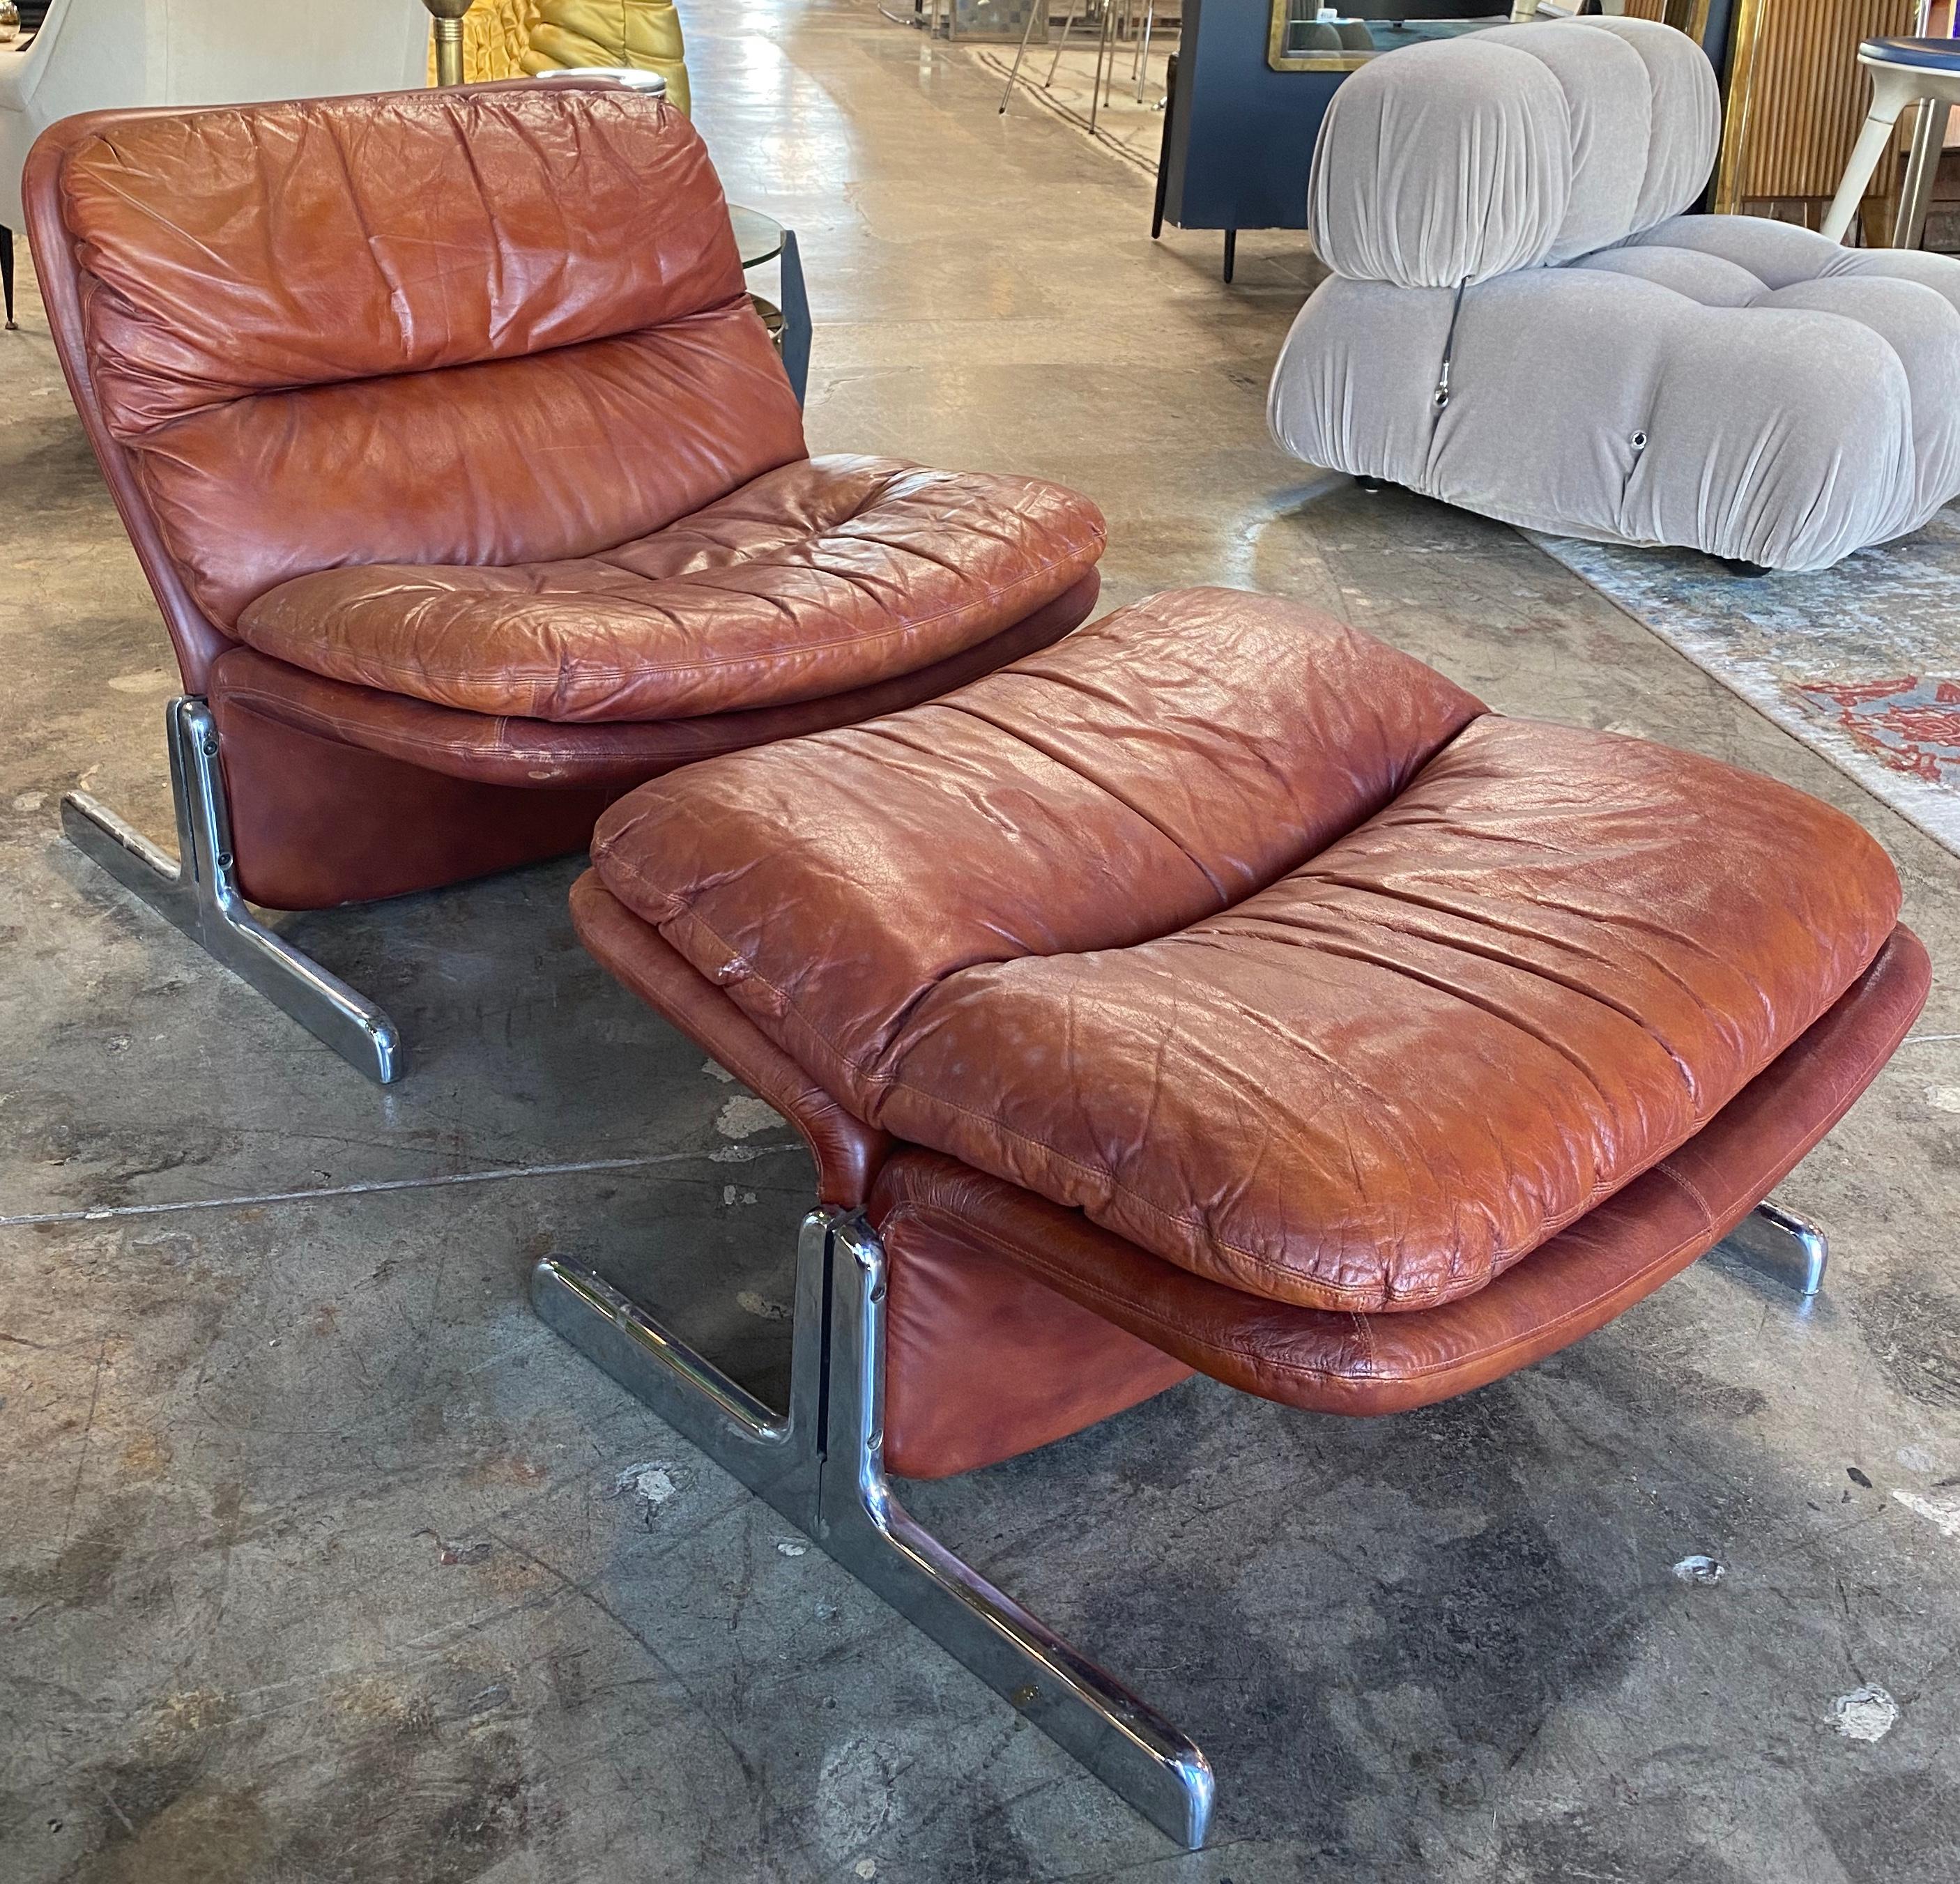 1970s modern leather lounge chair & ottoman by Tittina Ammannati & Vitelli Giampiero for Brunati in Italy.
Brown leather & chrome plated steel. Midcentury Modern Mad all the way.
Dimensions: Chair 28 1/2